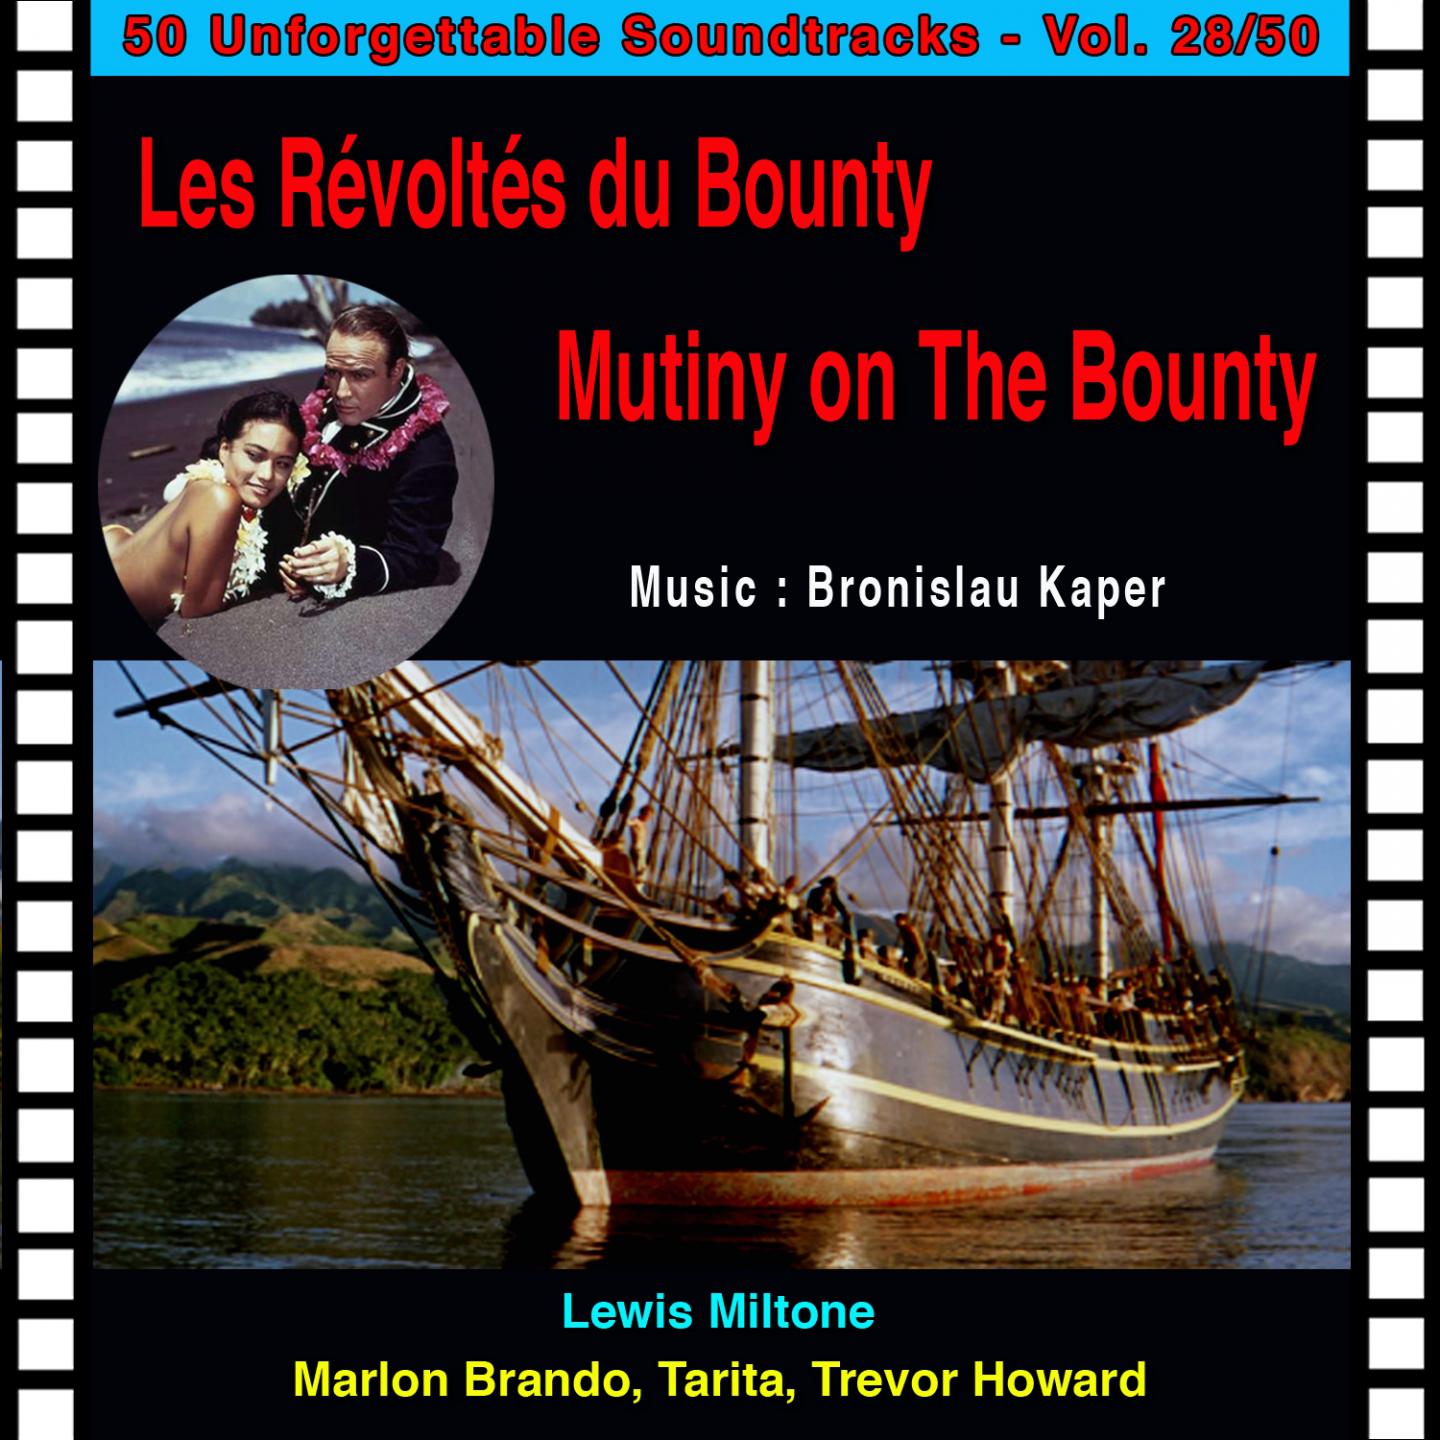 Outrigger Chase Les Re volte s Du Bounty  Mutiny on the Bounty